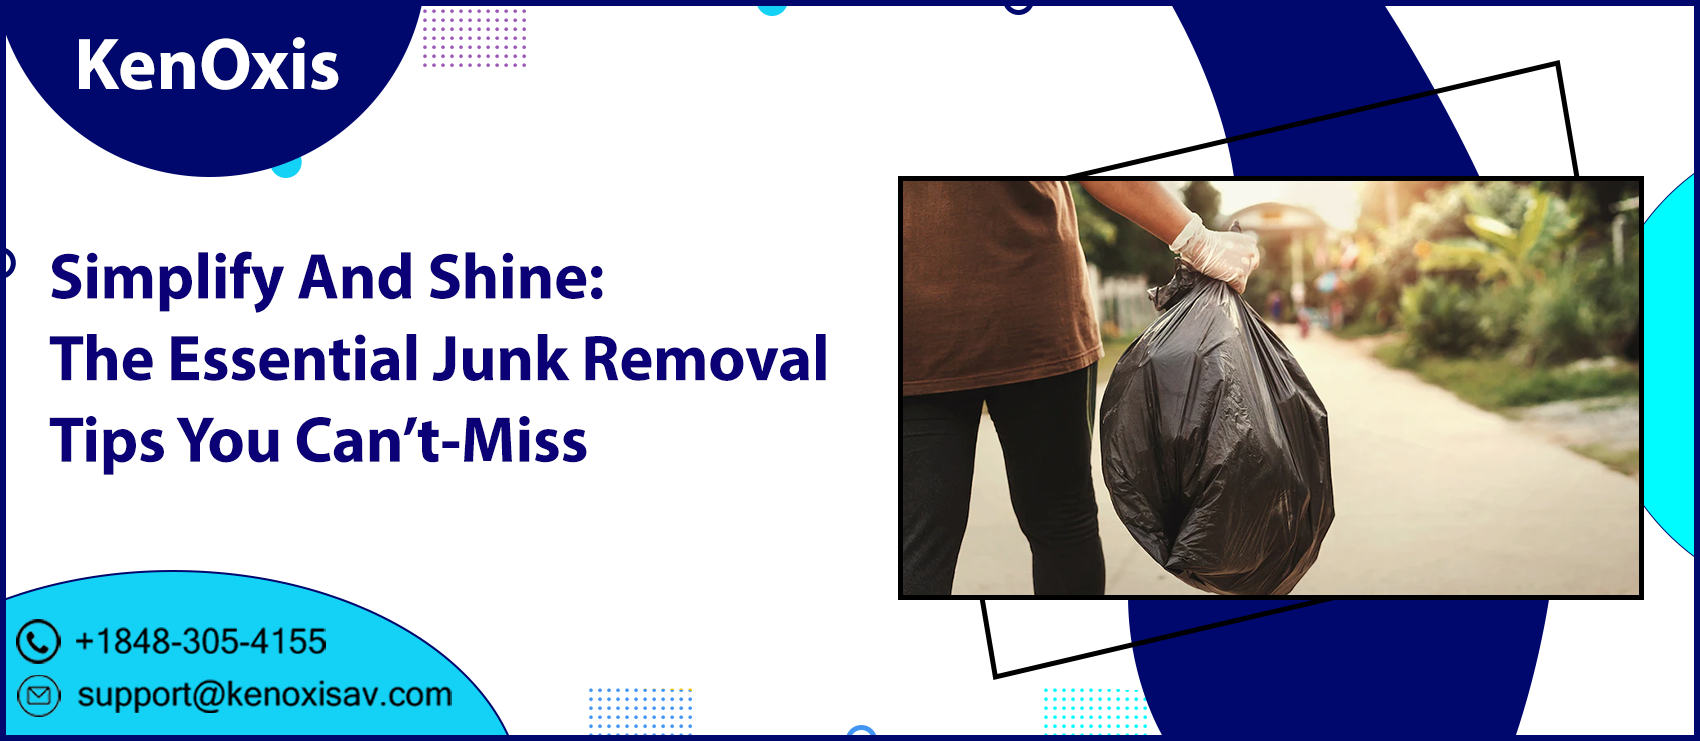 Simplify And Shine: The Essential Junk Removal Tips You Can’t-Miss